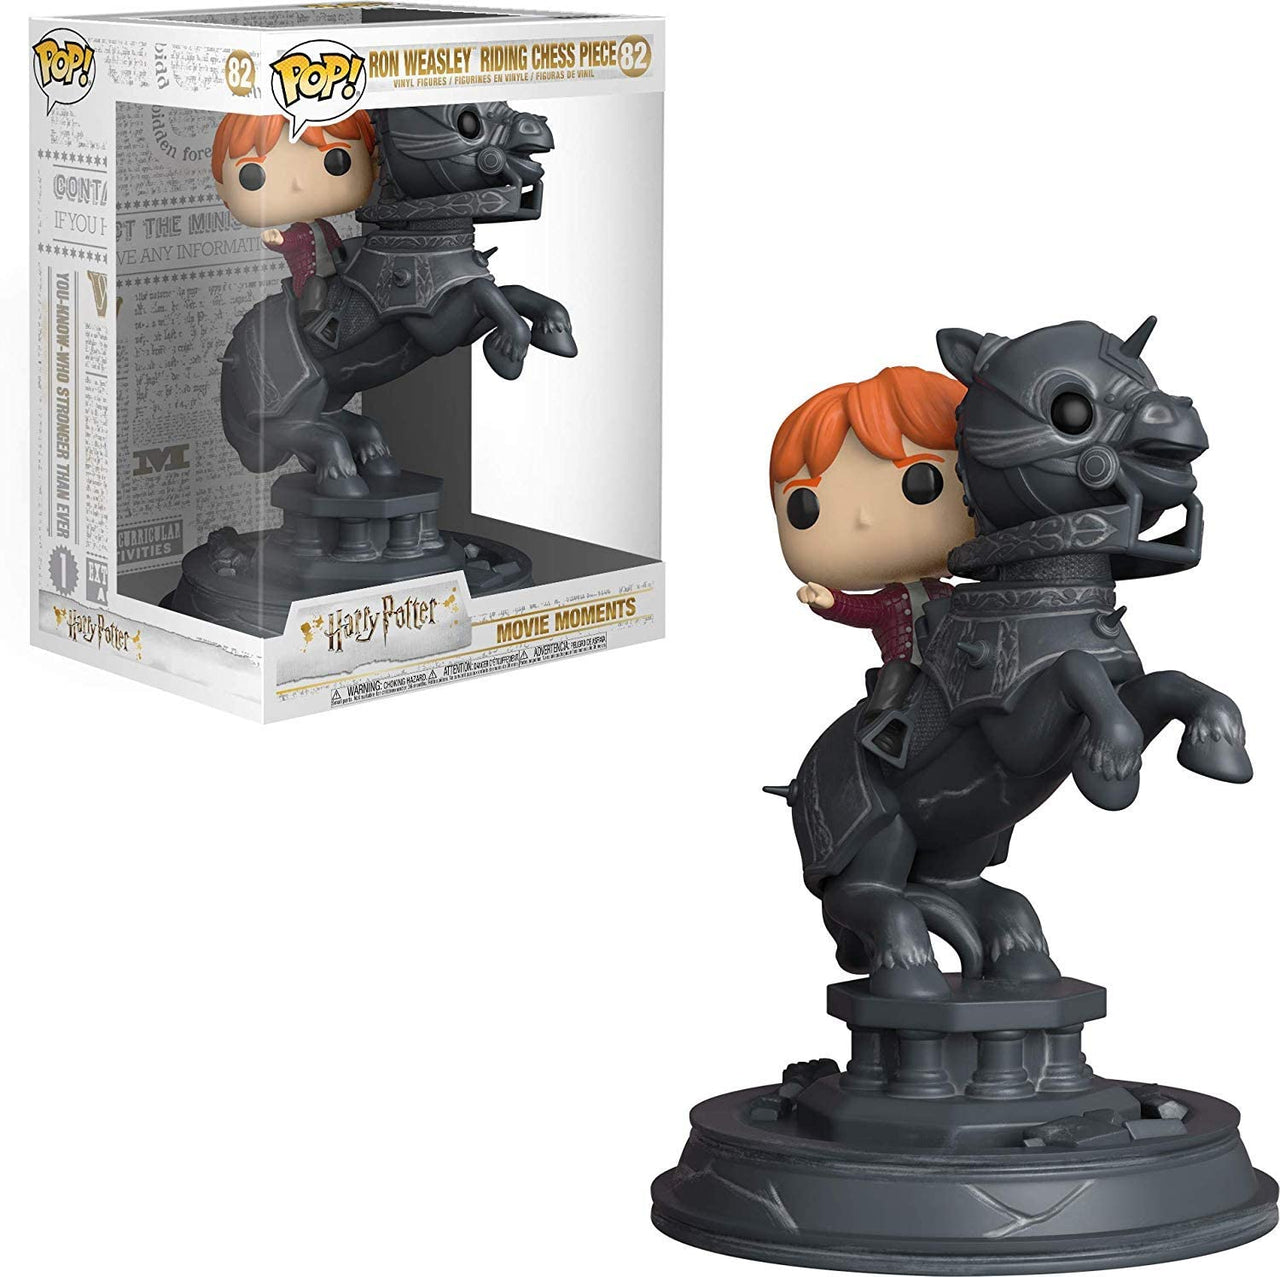 Funko POP! Movie Moment: Harry Potter - Ron Riding Chesspiece